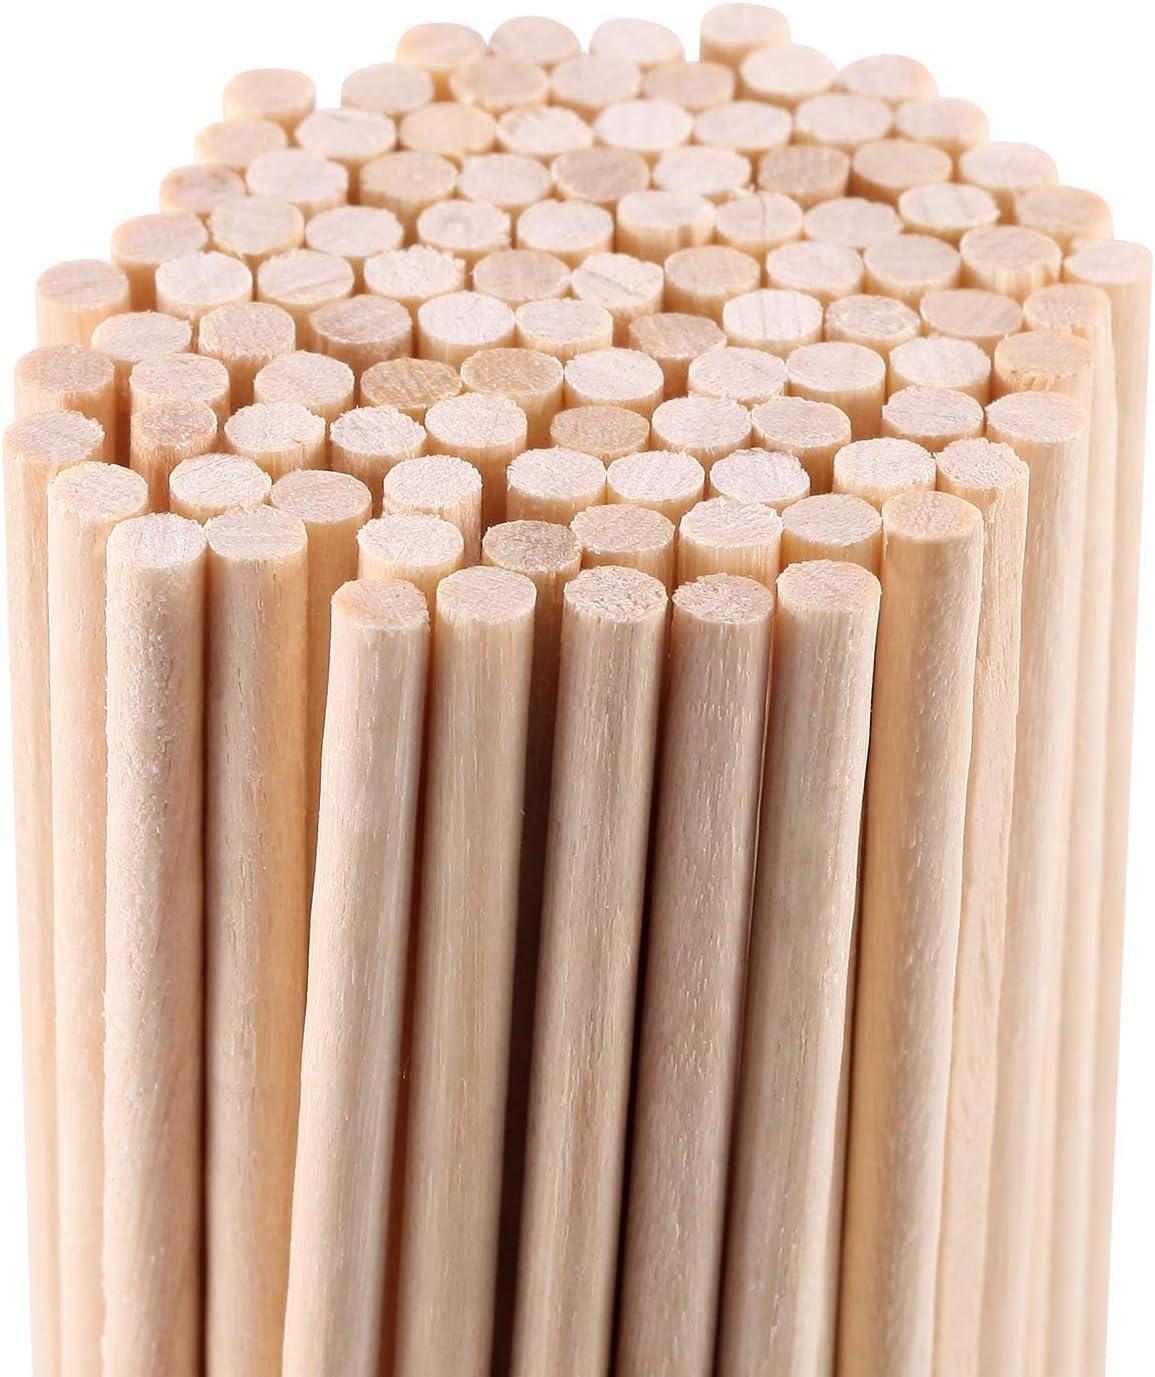 Senkary Wooden Dowel Rods 1/8 x 6 Inch Unfinished Natural Wood Craft Dowel  Rods 100 Pieces 1/8 x 6 Inches